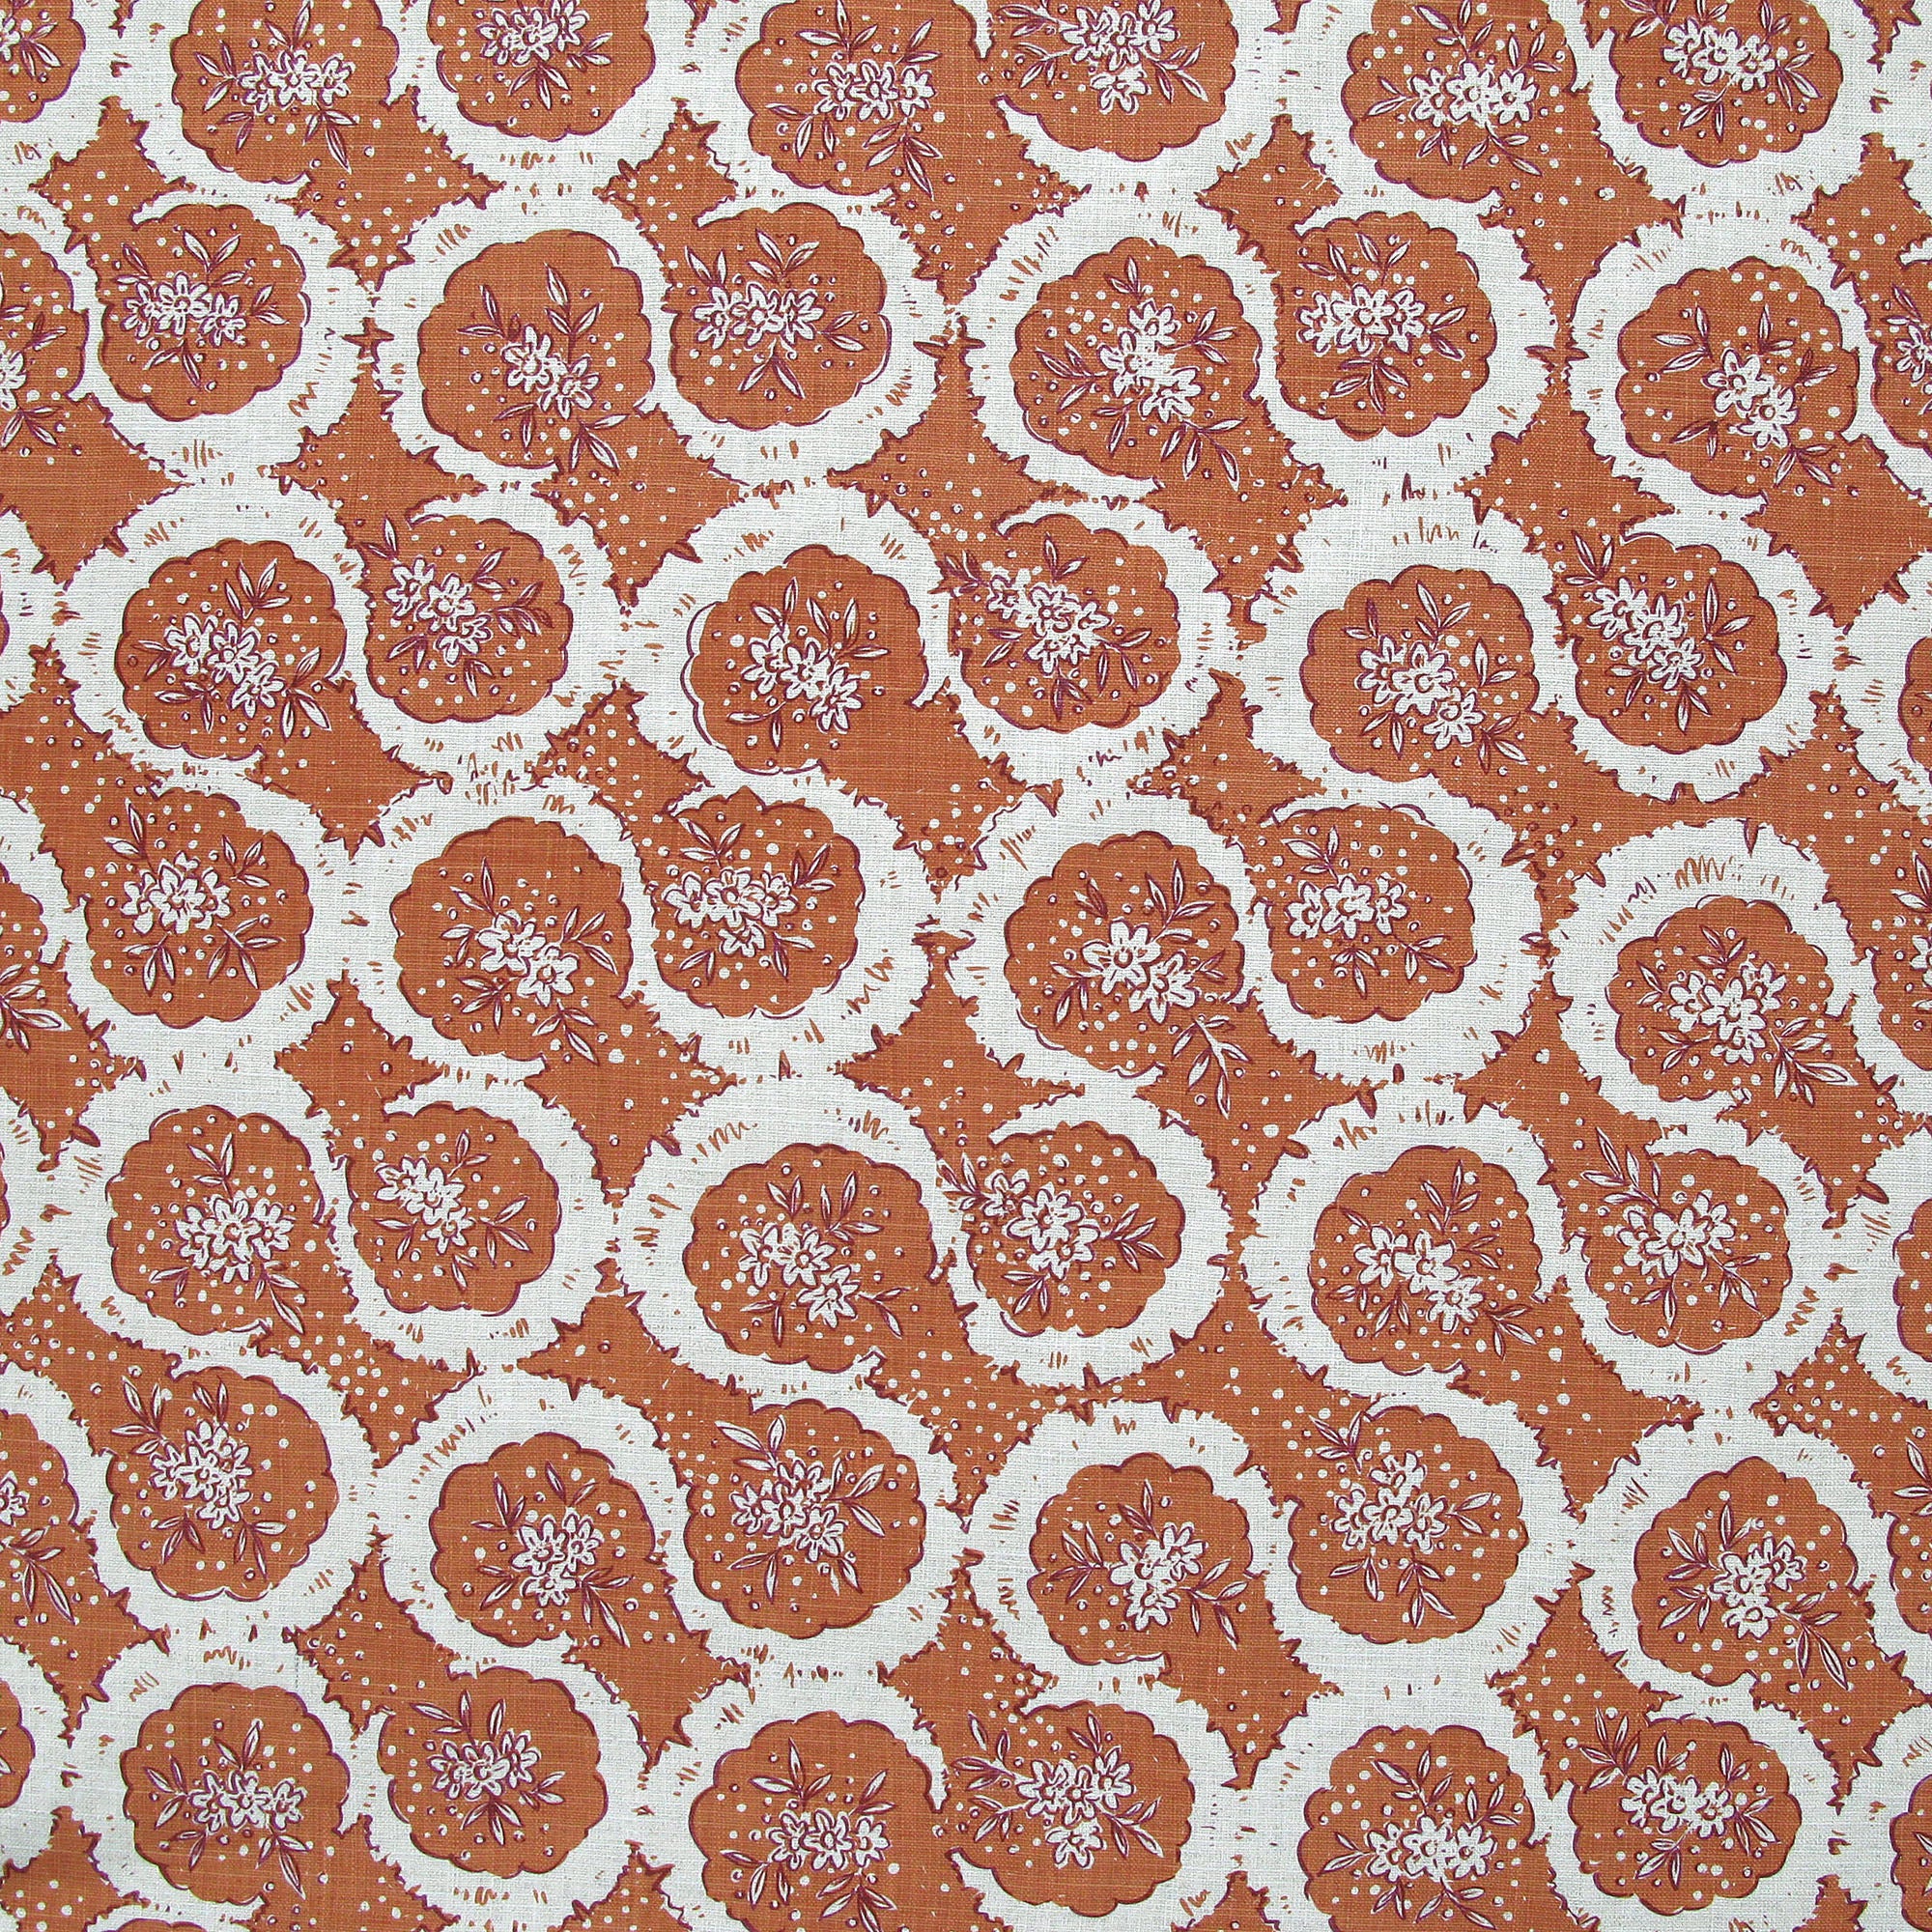 Detail of fabric in a meandering floral grid print in white and maroon on a burnt orange field.